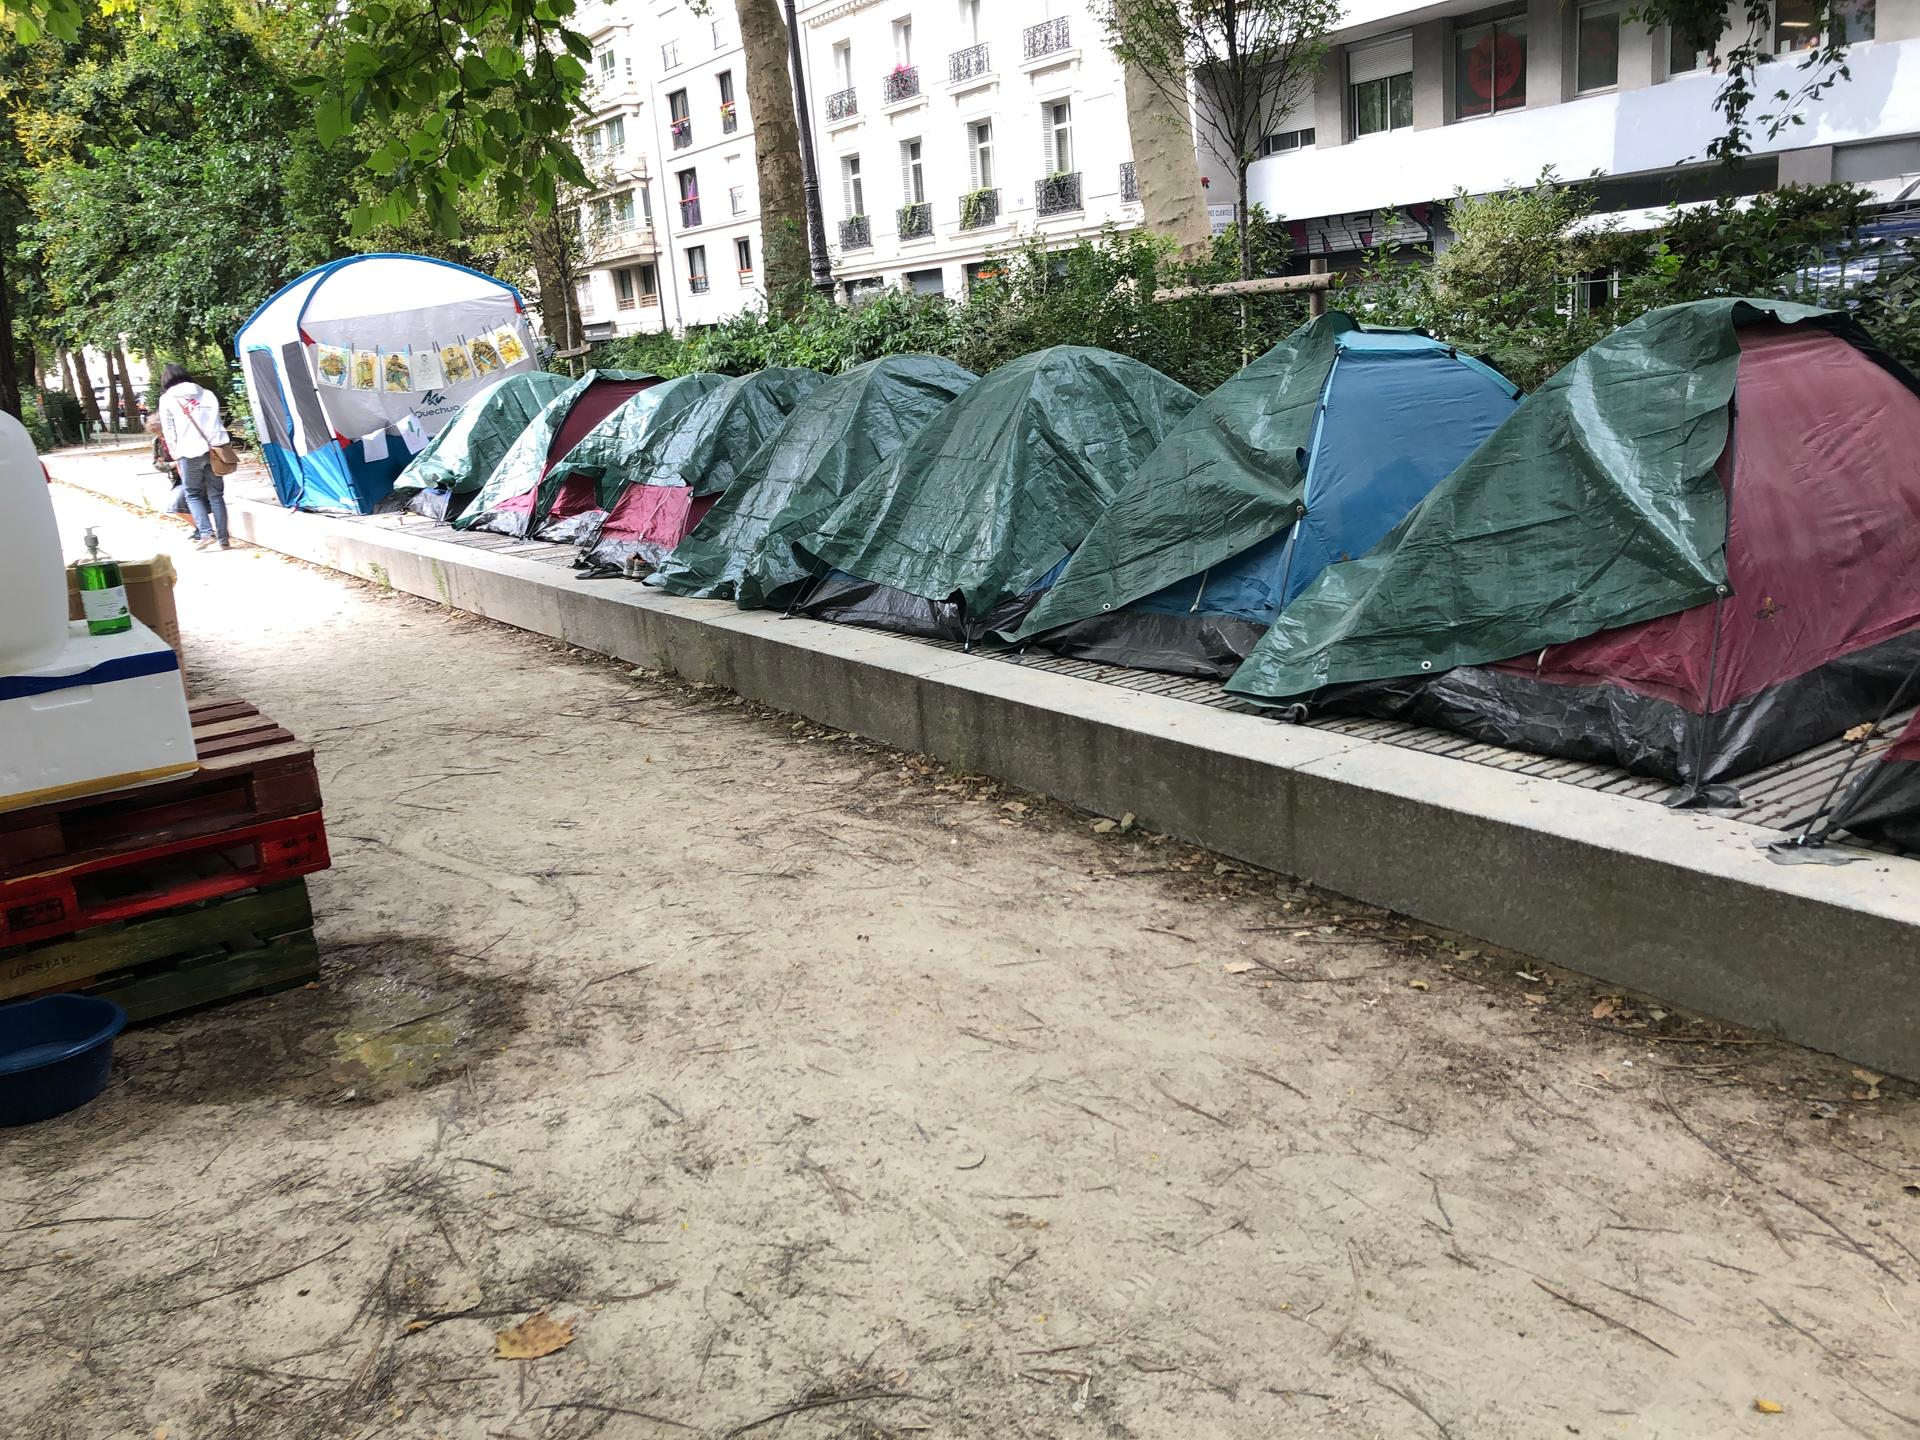 In early July, five nongovernmental organizations worked together to set up a camp for 100 migrant boys. They are pressuring the French government to establish permanent housing for the unaccompanied youth.